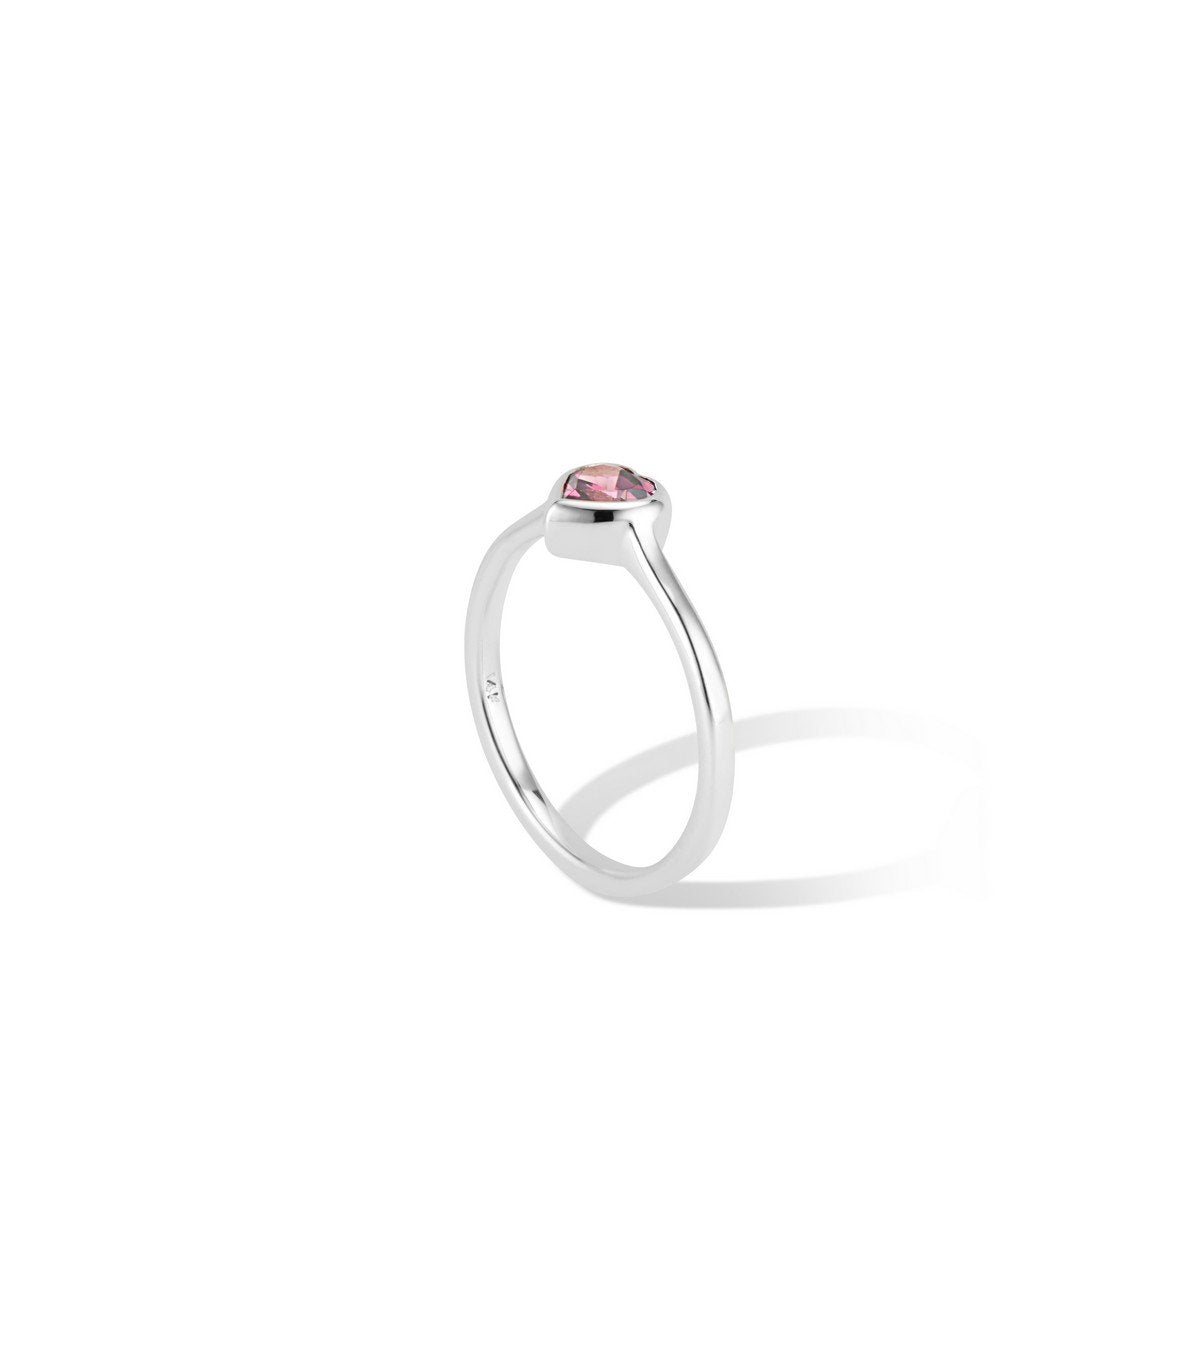 Gold Heart Ring with Rhodolite Garnet - Thomas Laine Jewelry